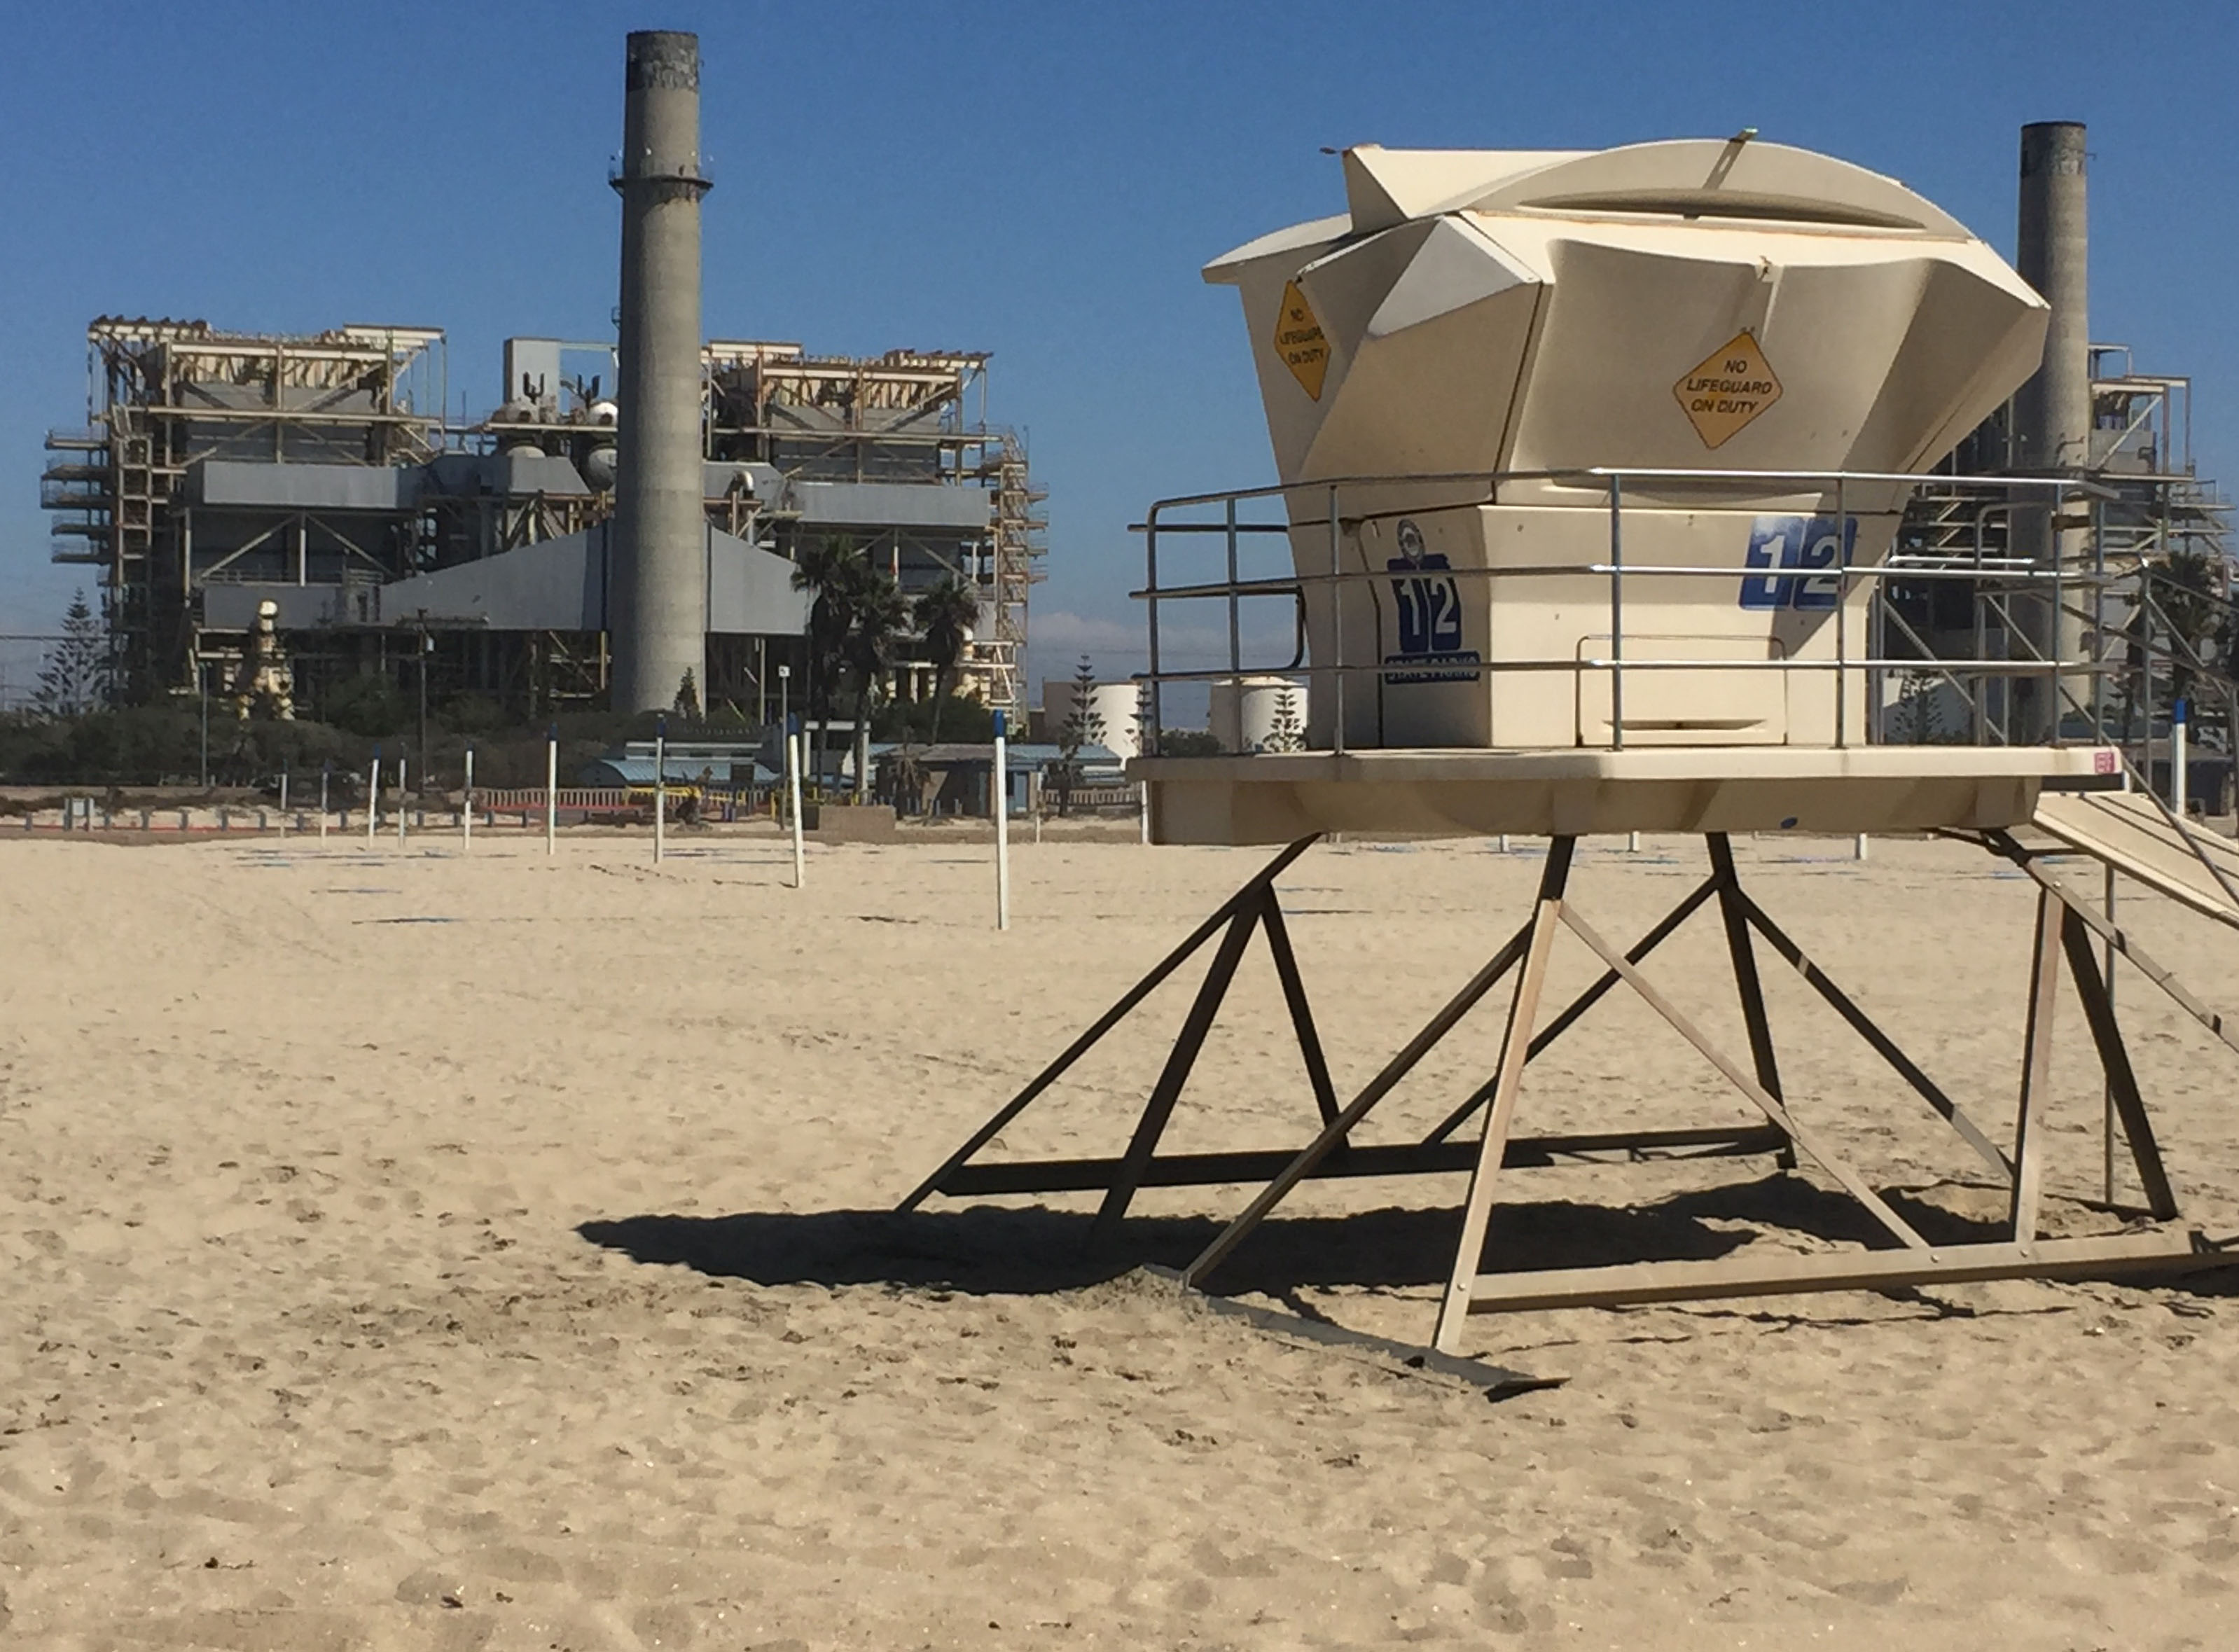 The proposed Huntington Beach desal plant would use the outflow pipe from the AES power plant (background) to deposit salt residue, known as brine, back into the ocean.